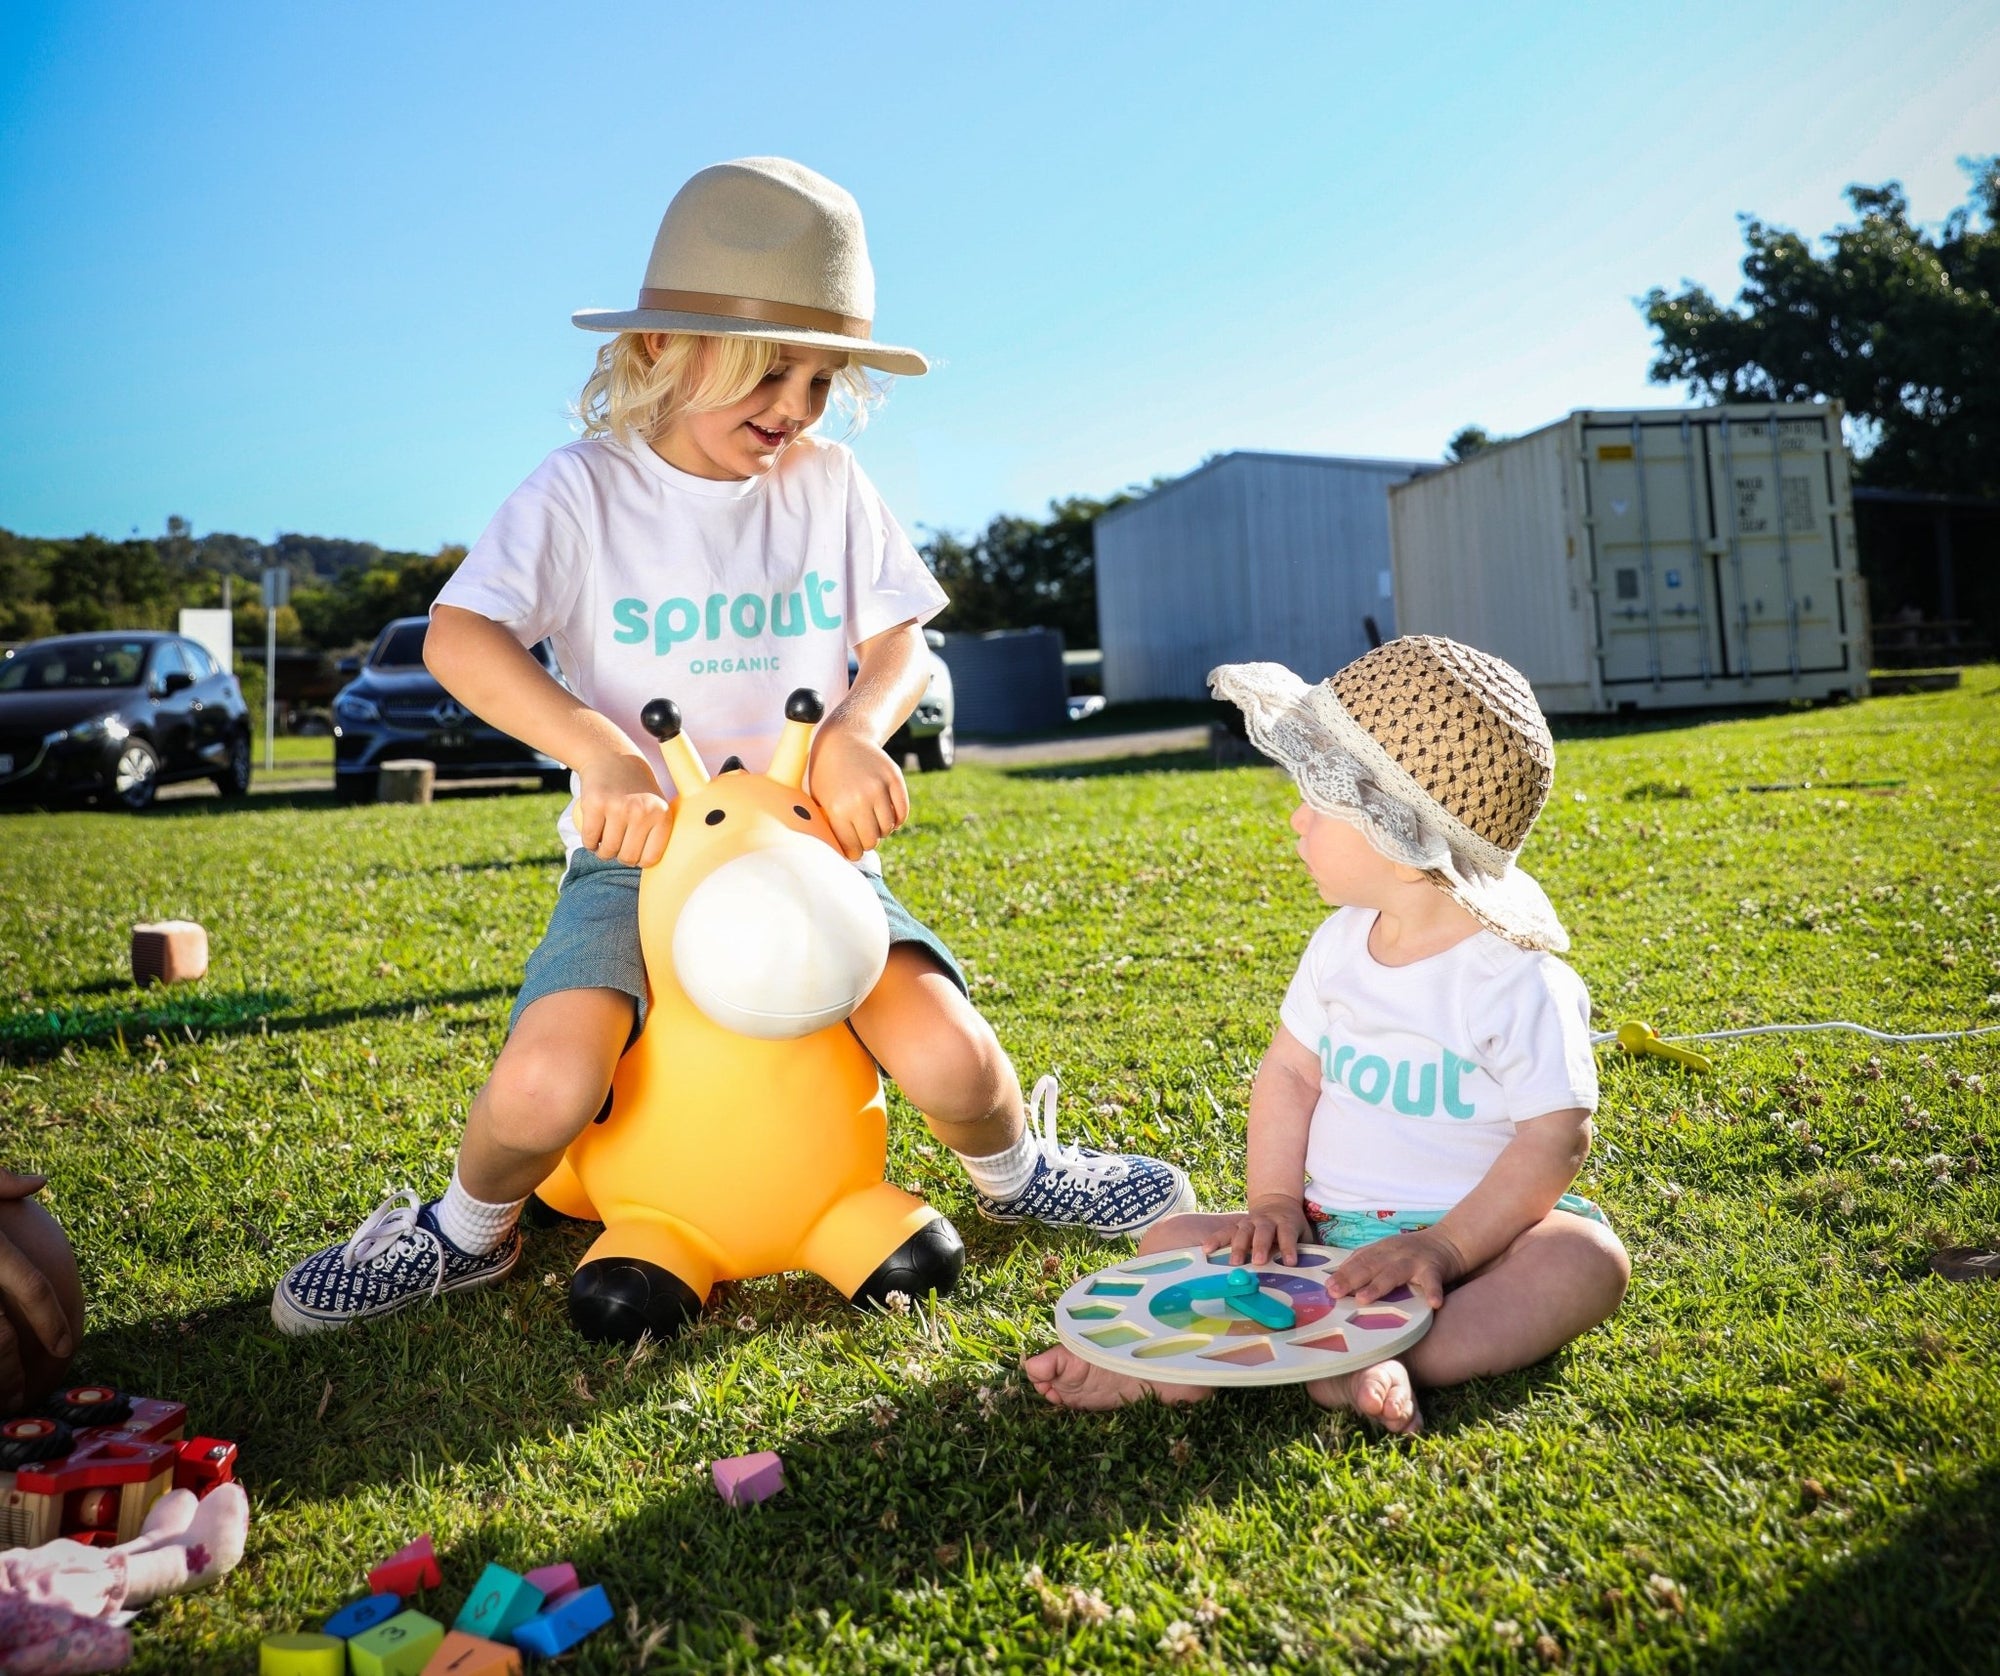 Fight Child Hunger Down-Under This World Children’s Day - Sprout Organic